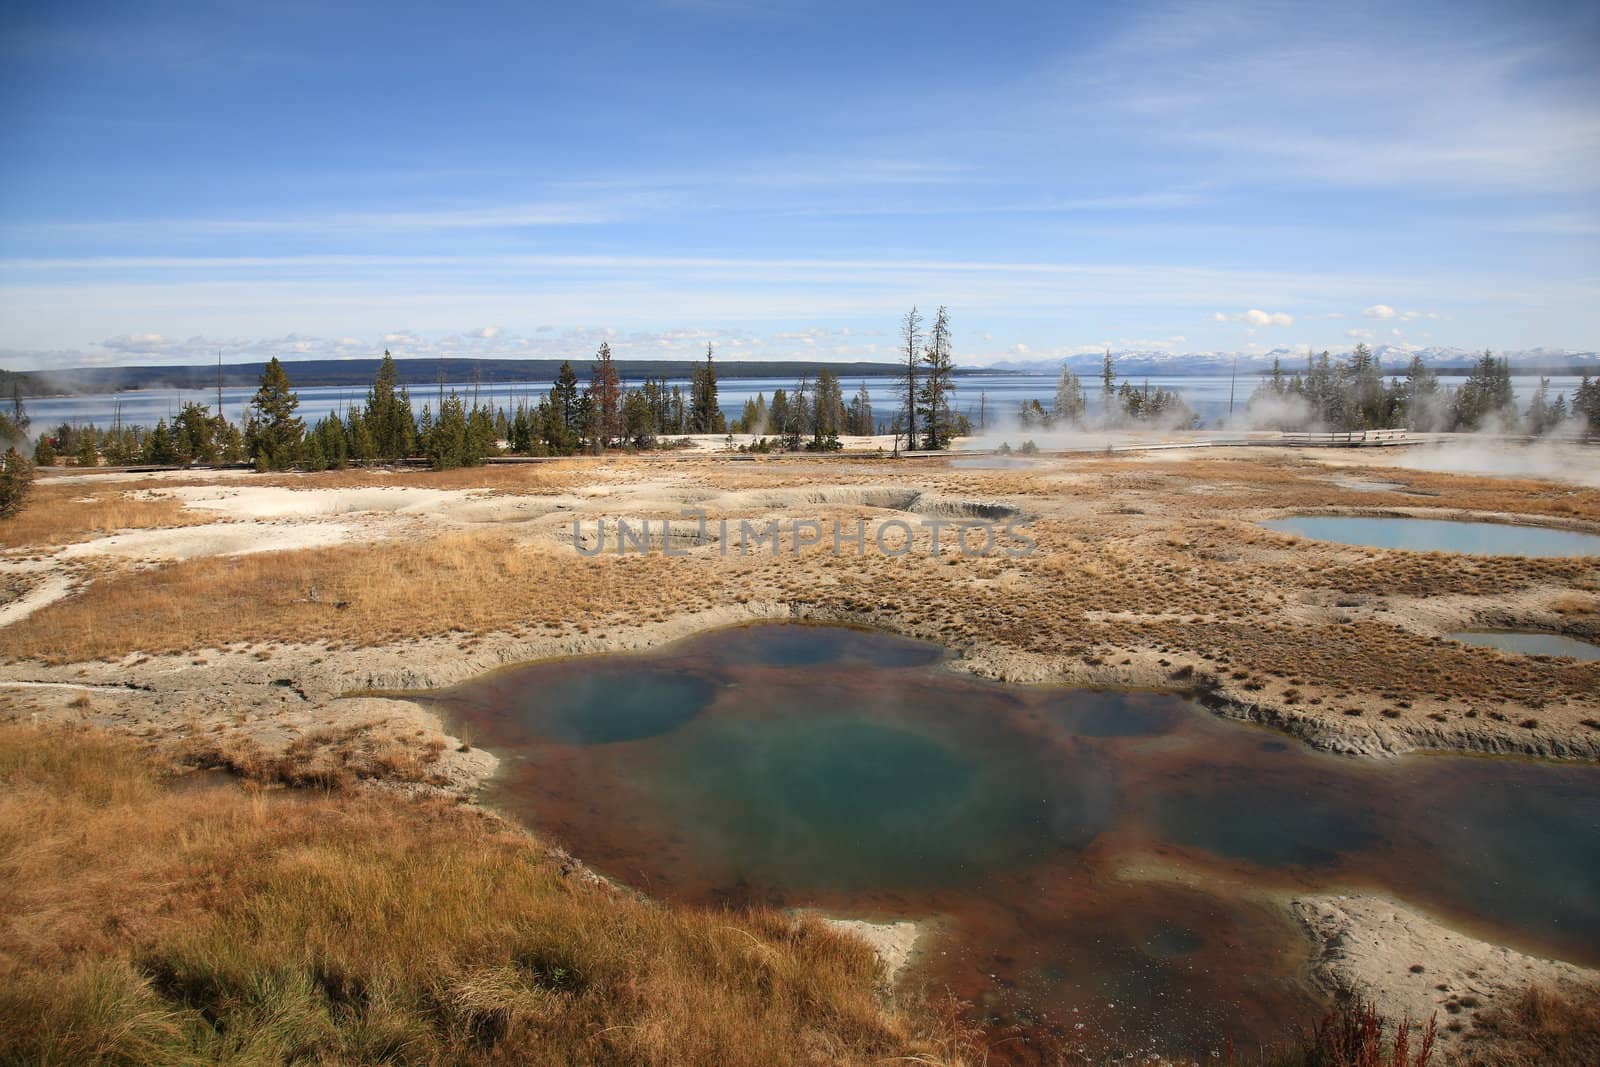 Steaming geothermal hot springs on the shore of Yellowstone Lake